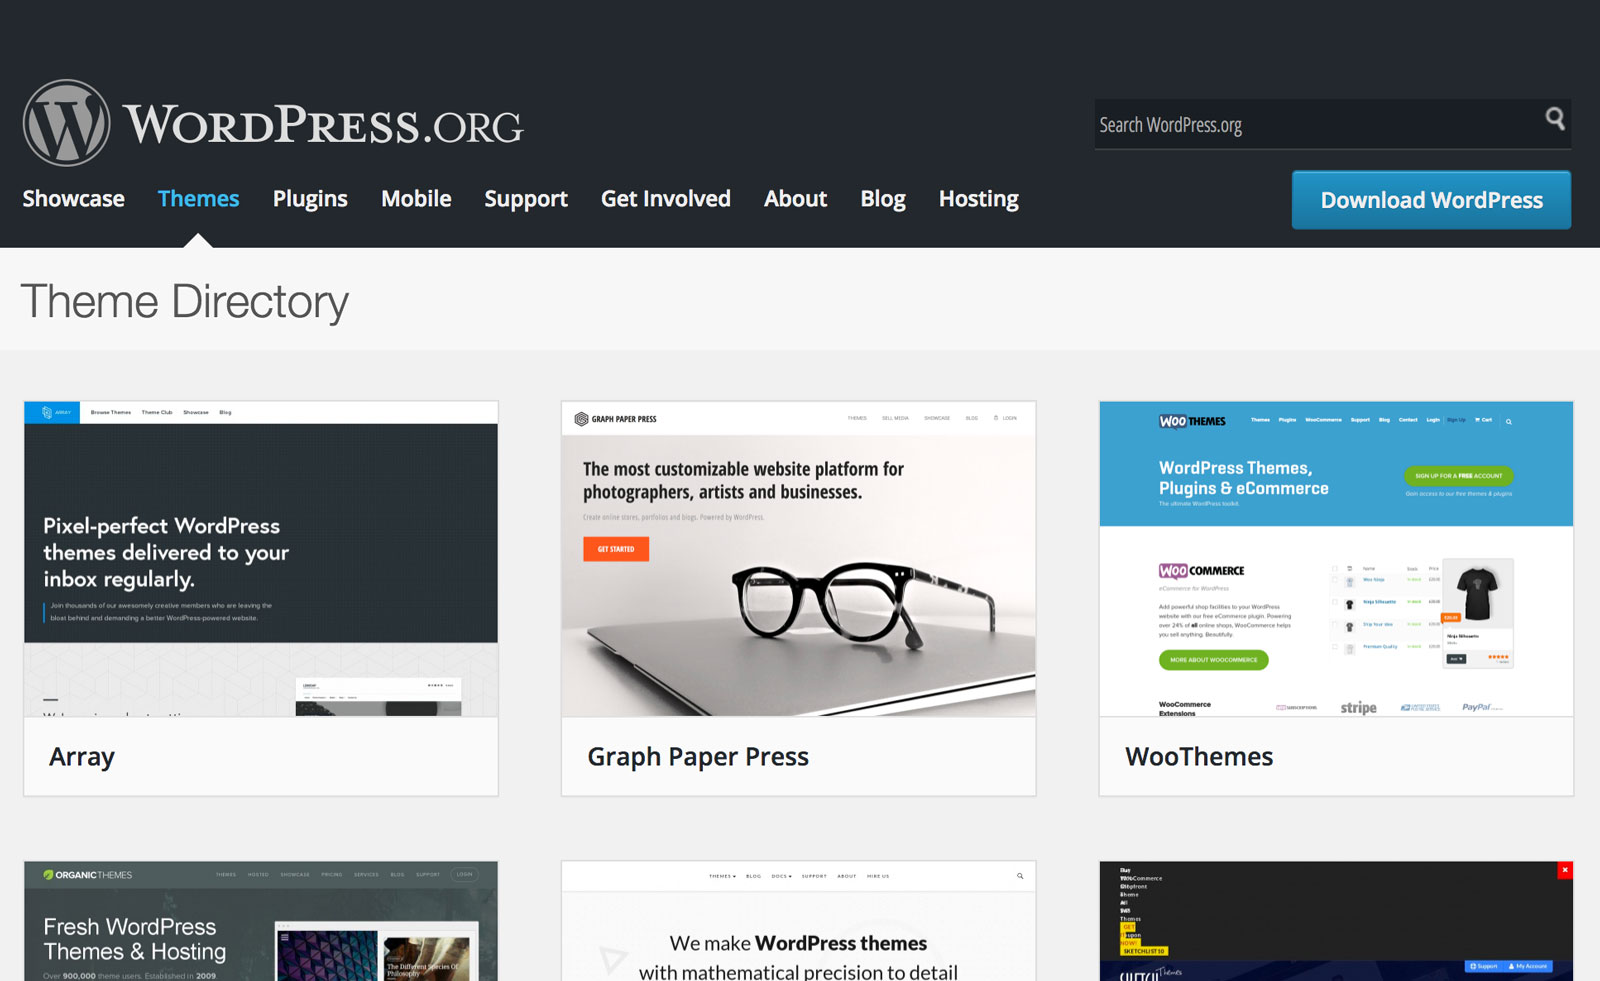 Searching For a Premium WordPress Theme? Use This Checklist